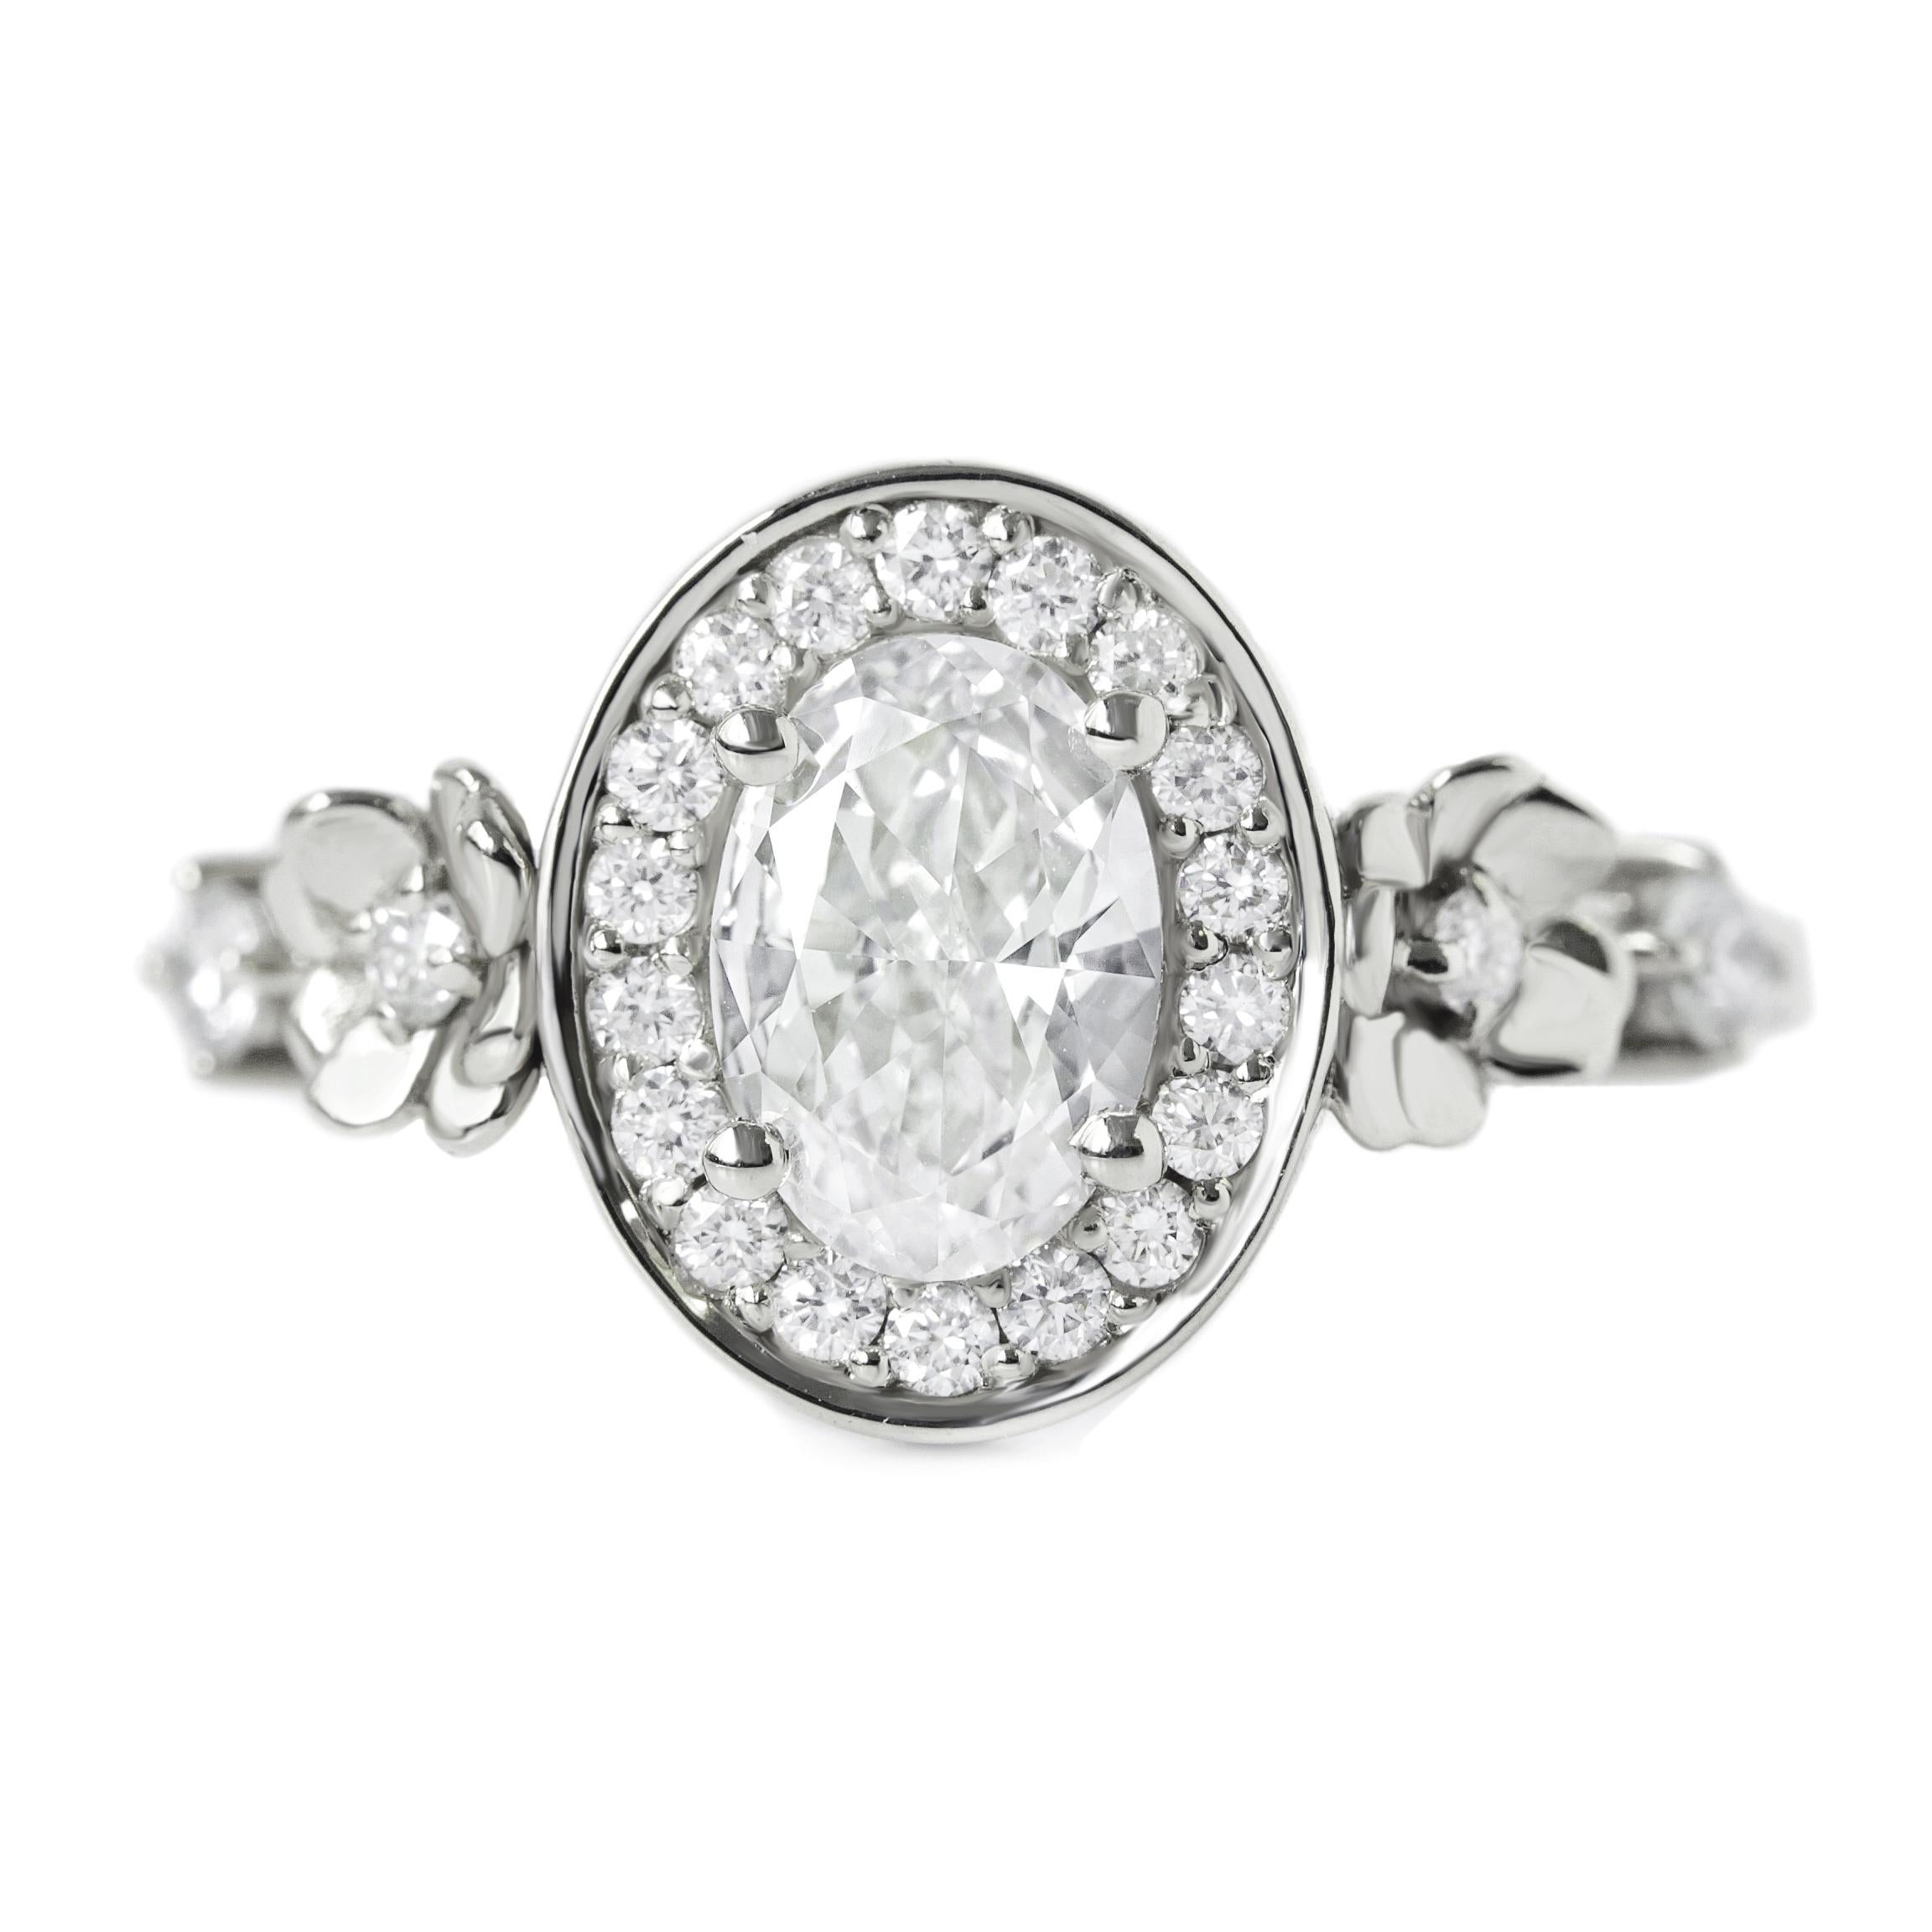 Oval Halo Diamond Floral Engagement Ring - 